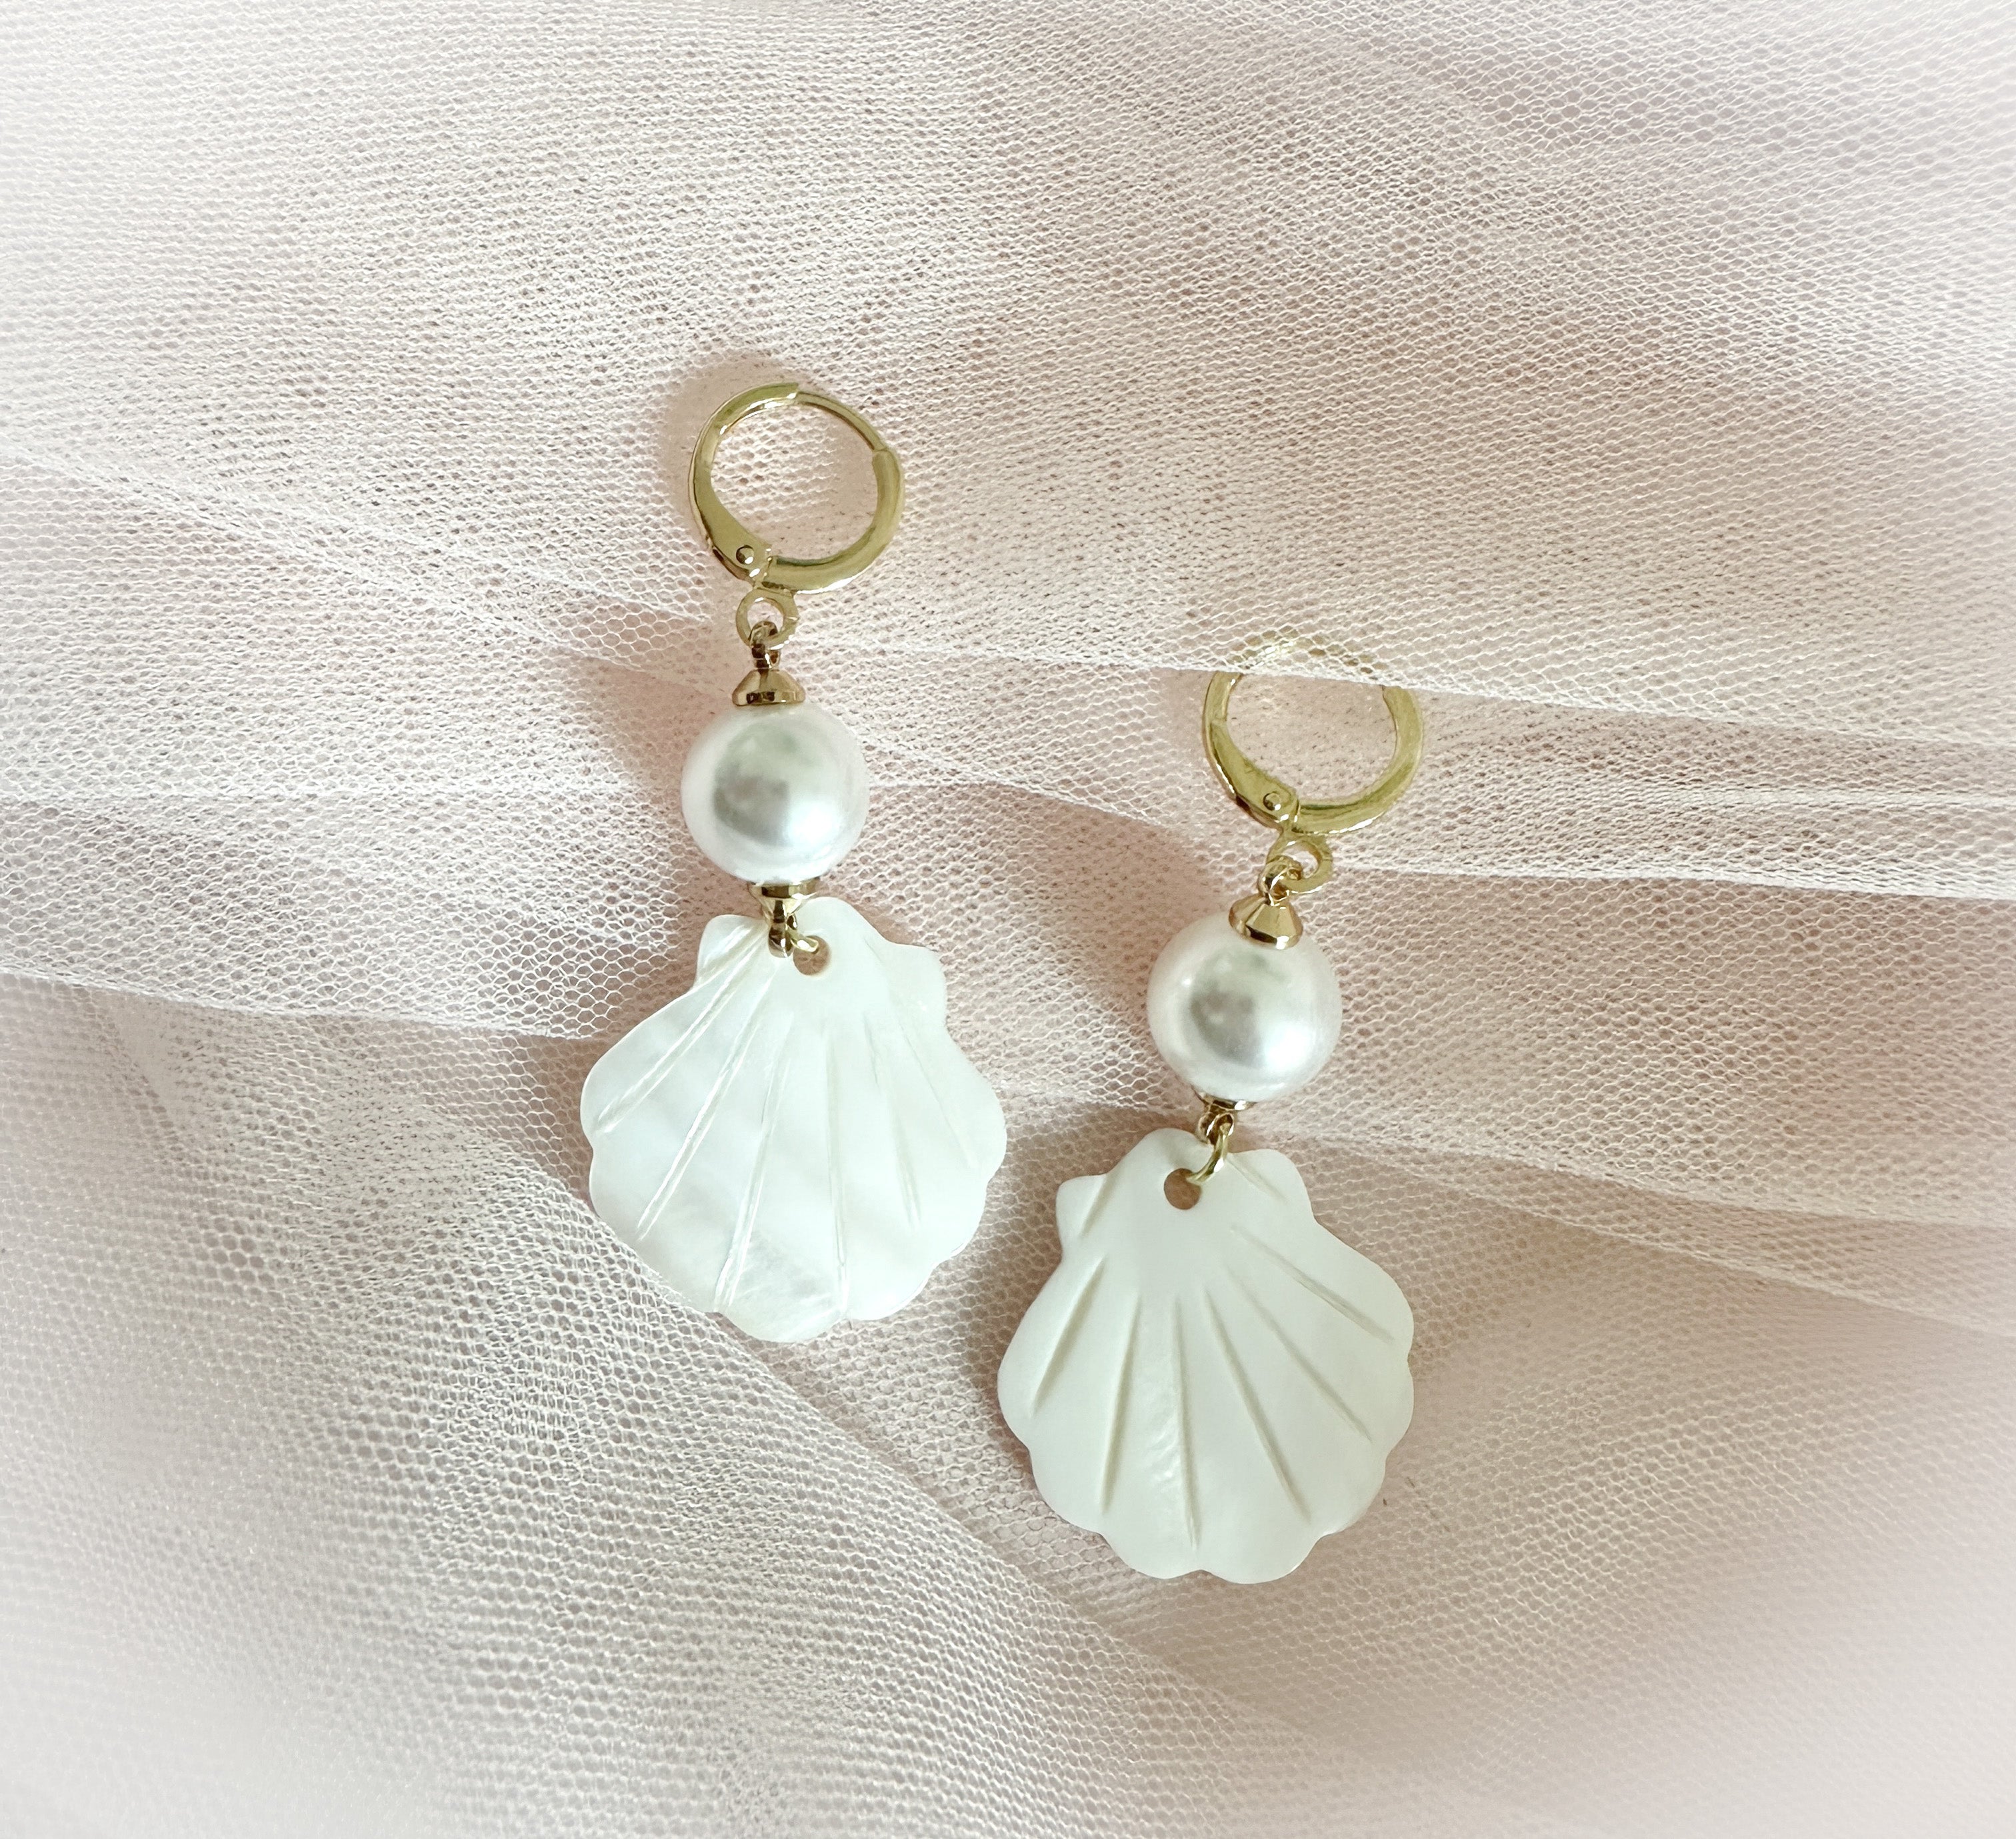 The “Mother Of Pearl” Seashell Earrings